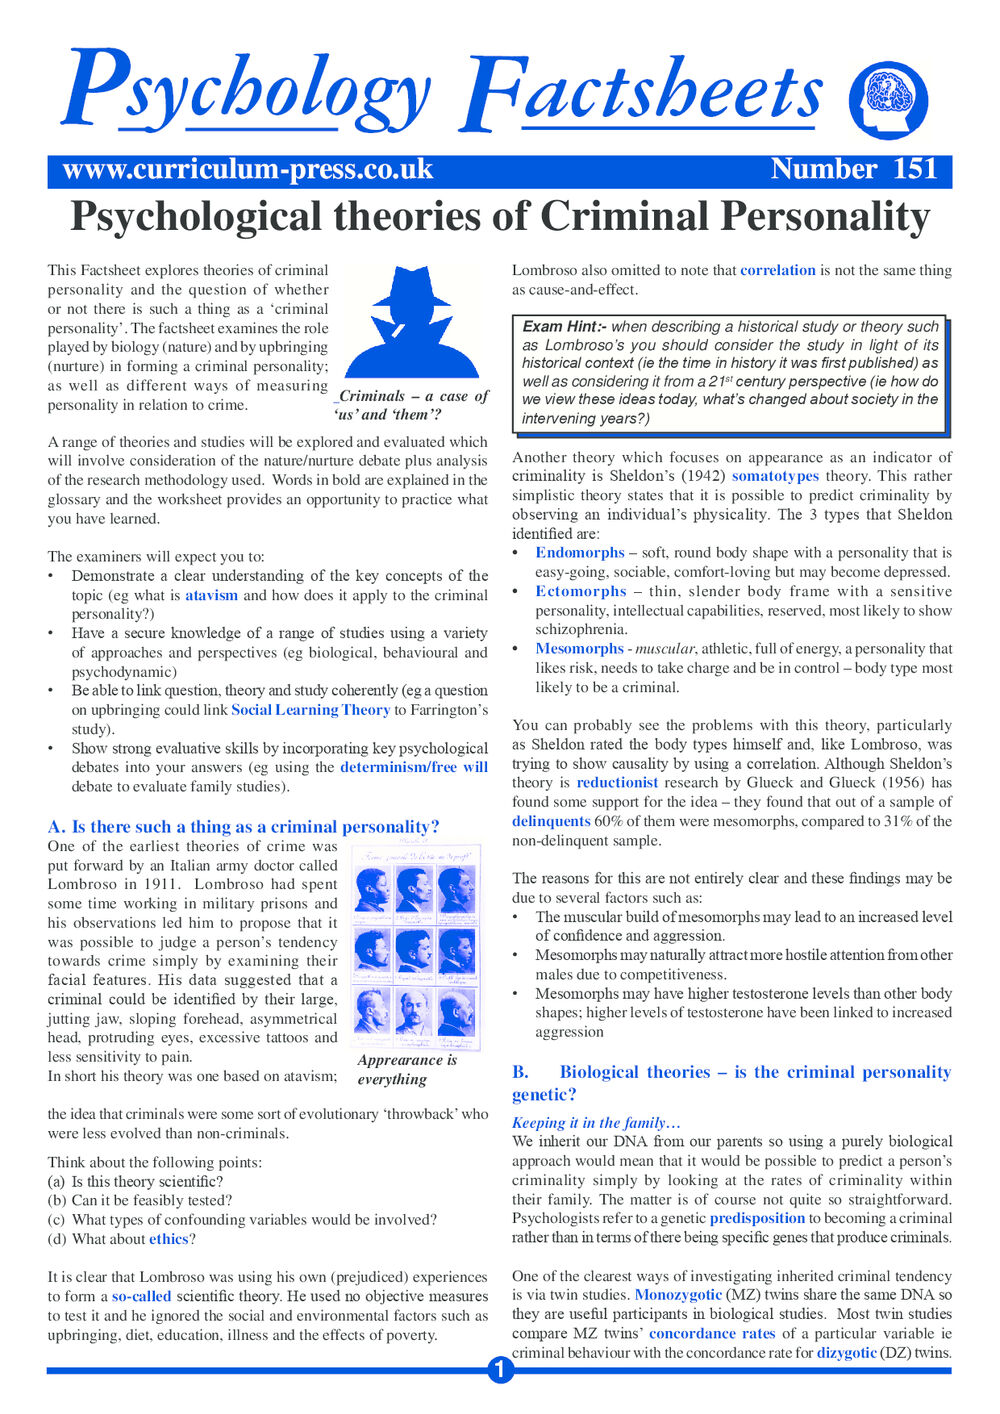 personality types criminals